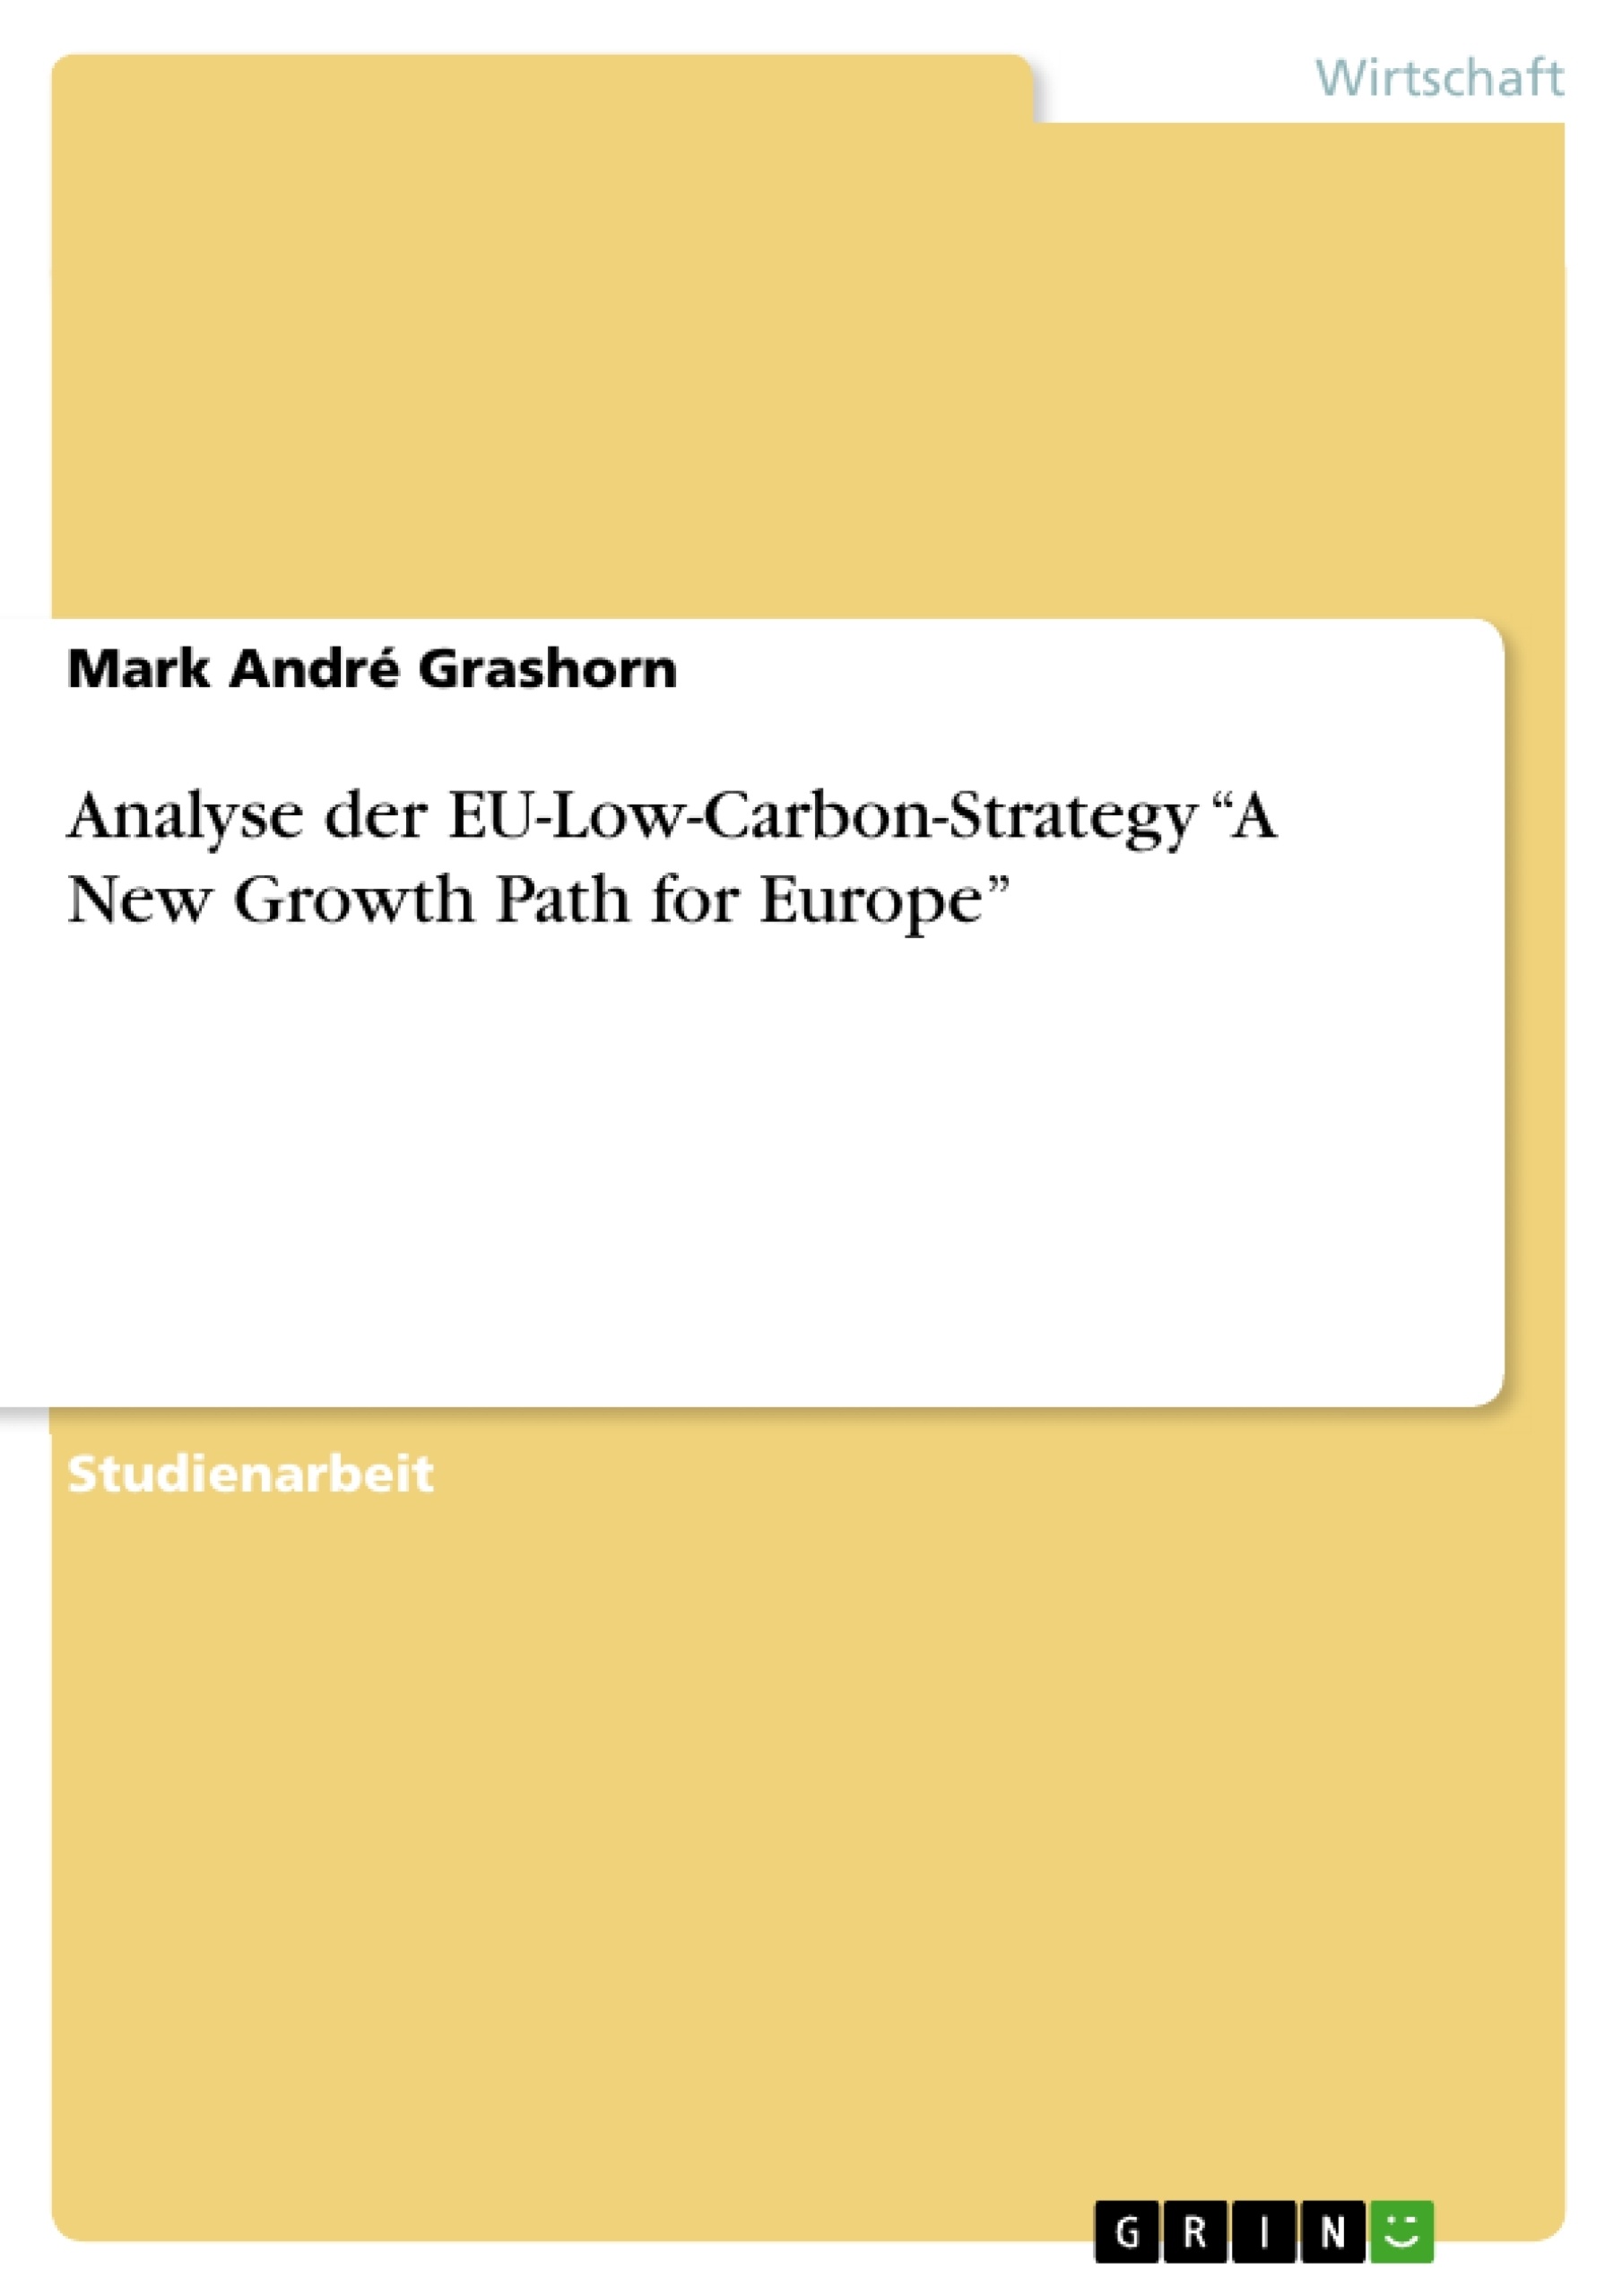 Título: Analyse der EU-Low-Carbon-Strategy “A New Growth Path for Europe”